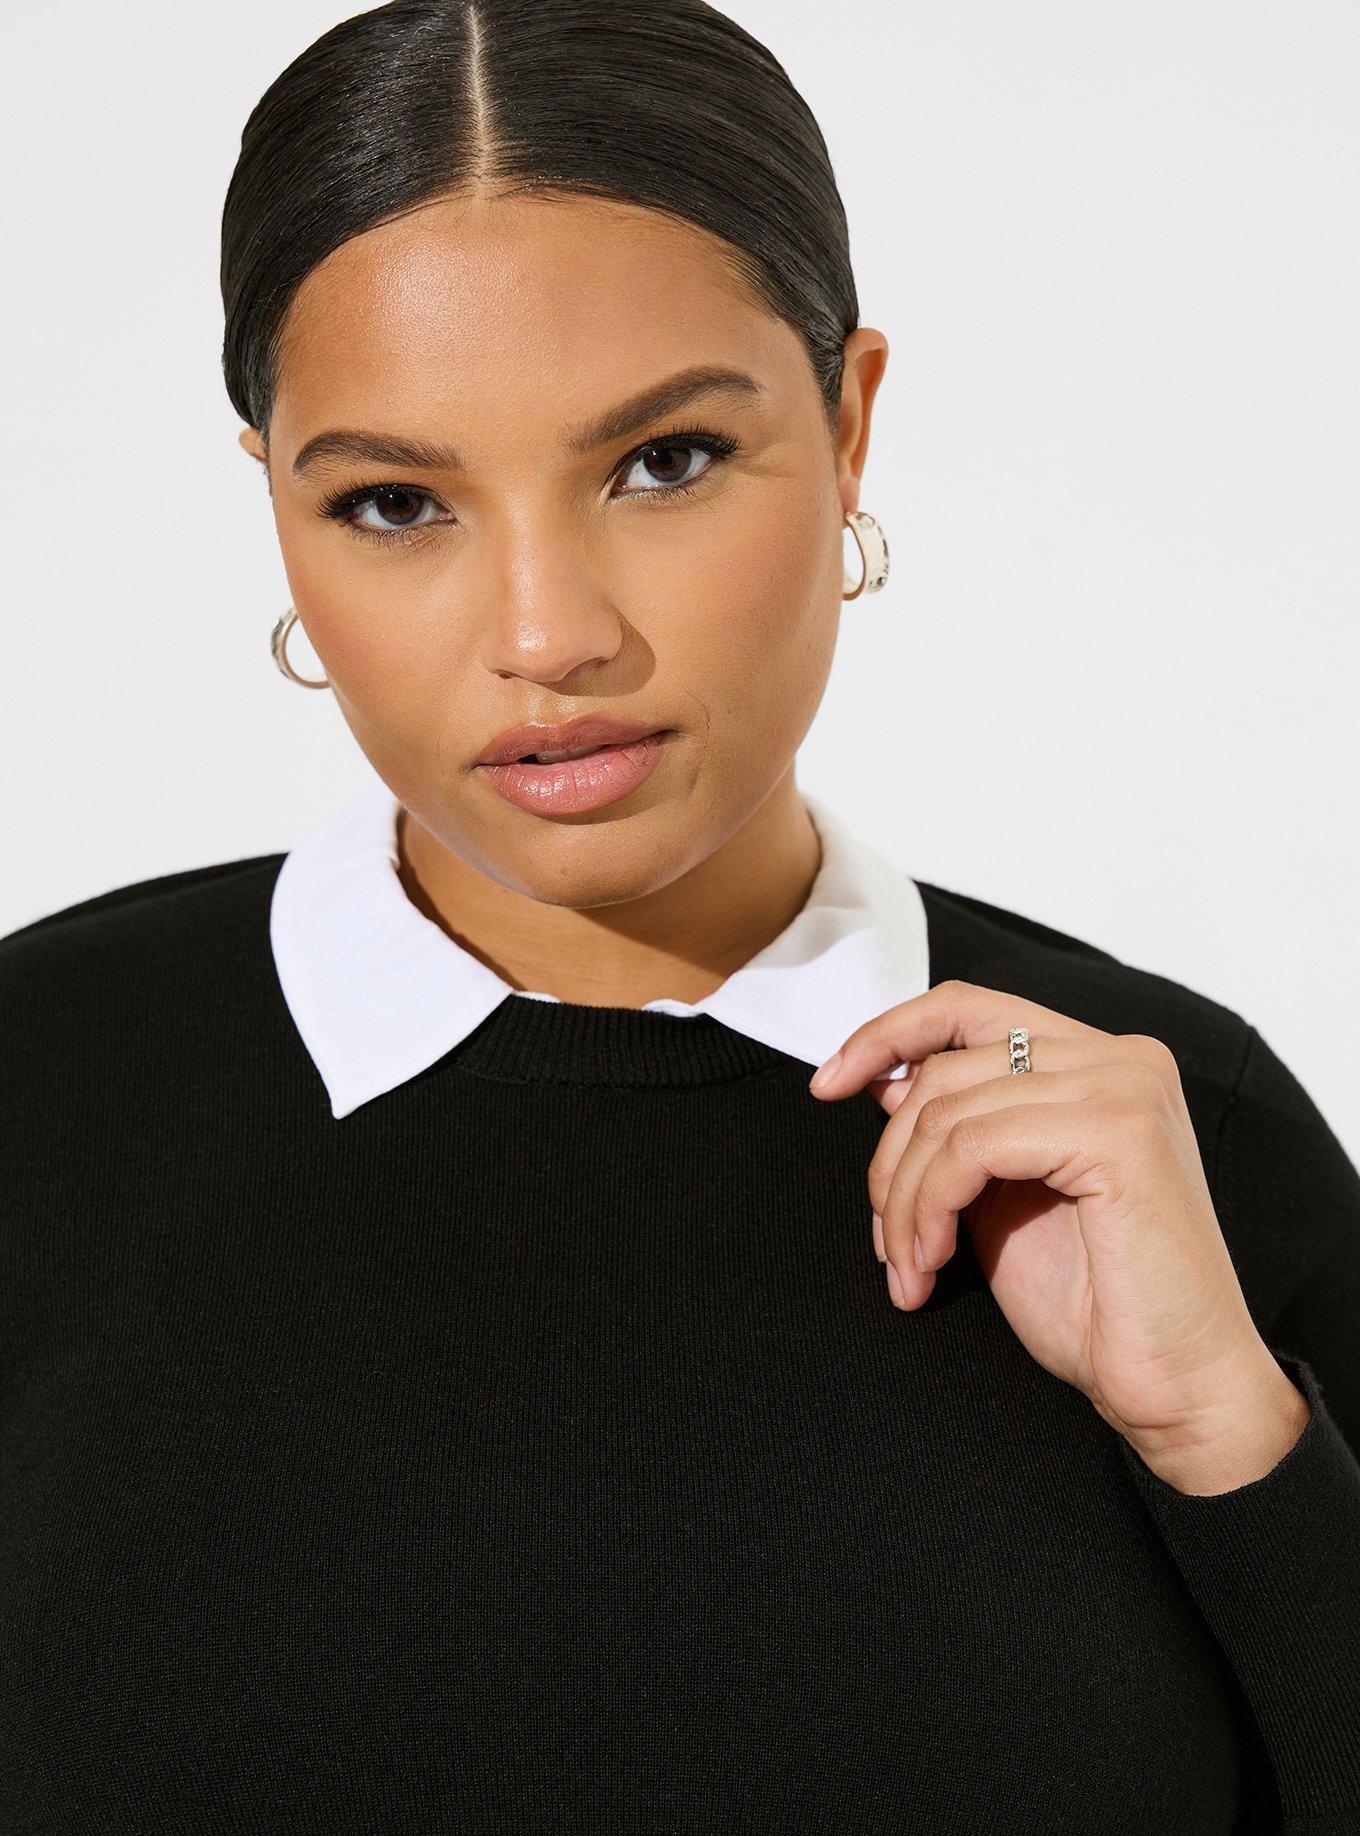 Plus Size - Fitted Pullover Collared 2-Fer Sweater - Torrid